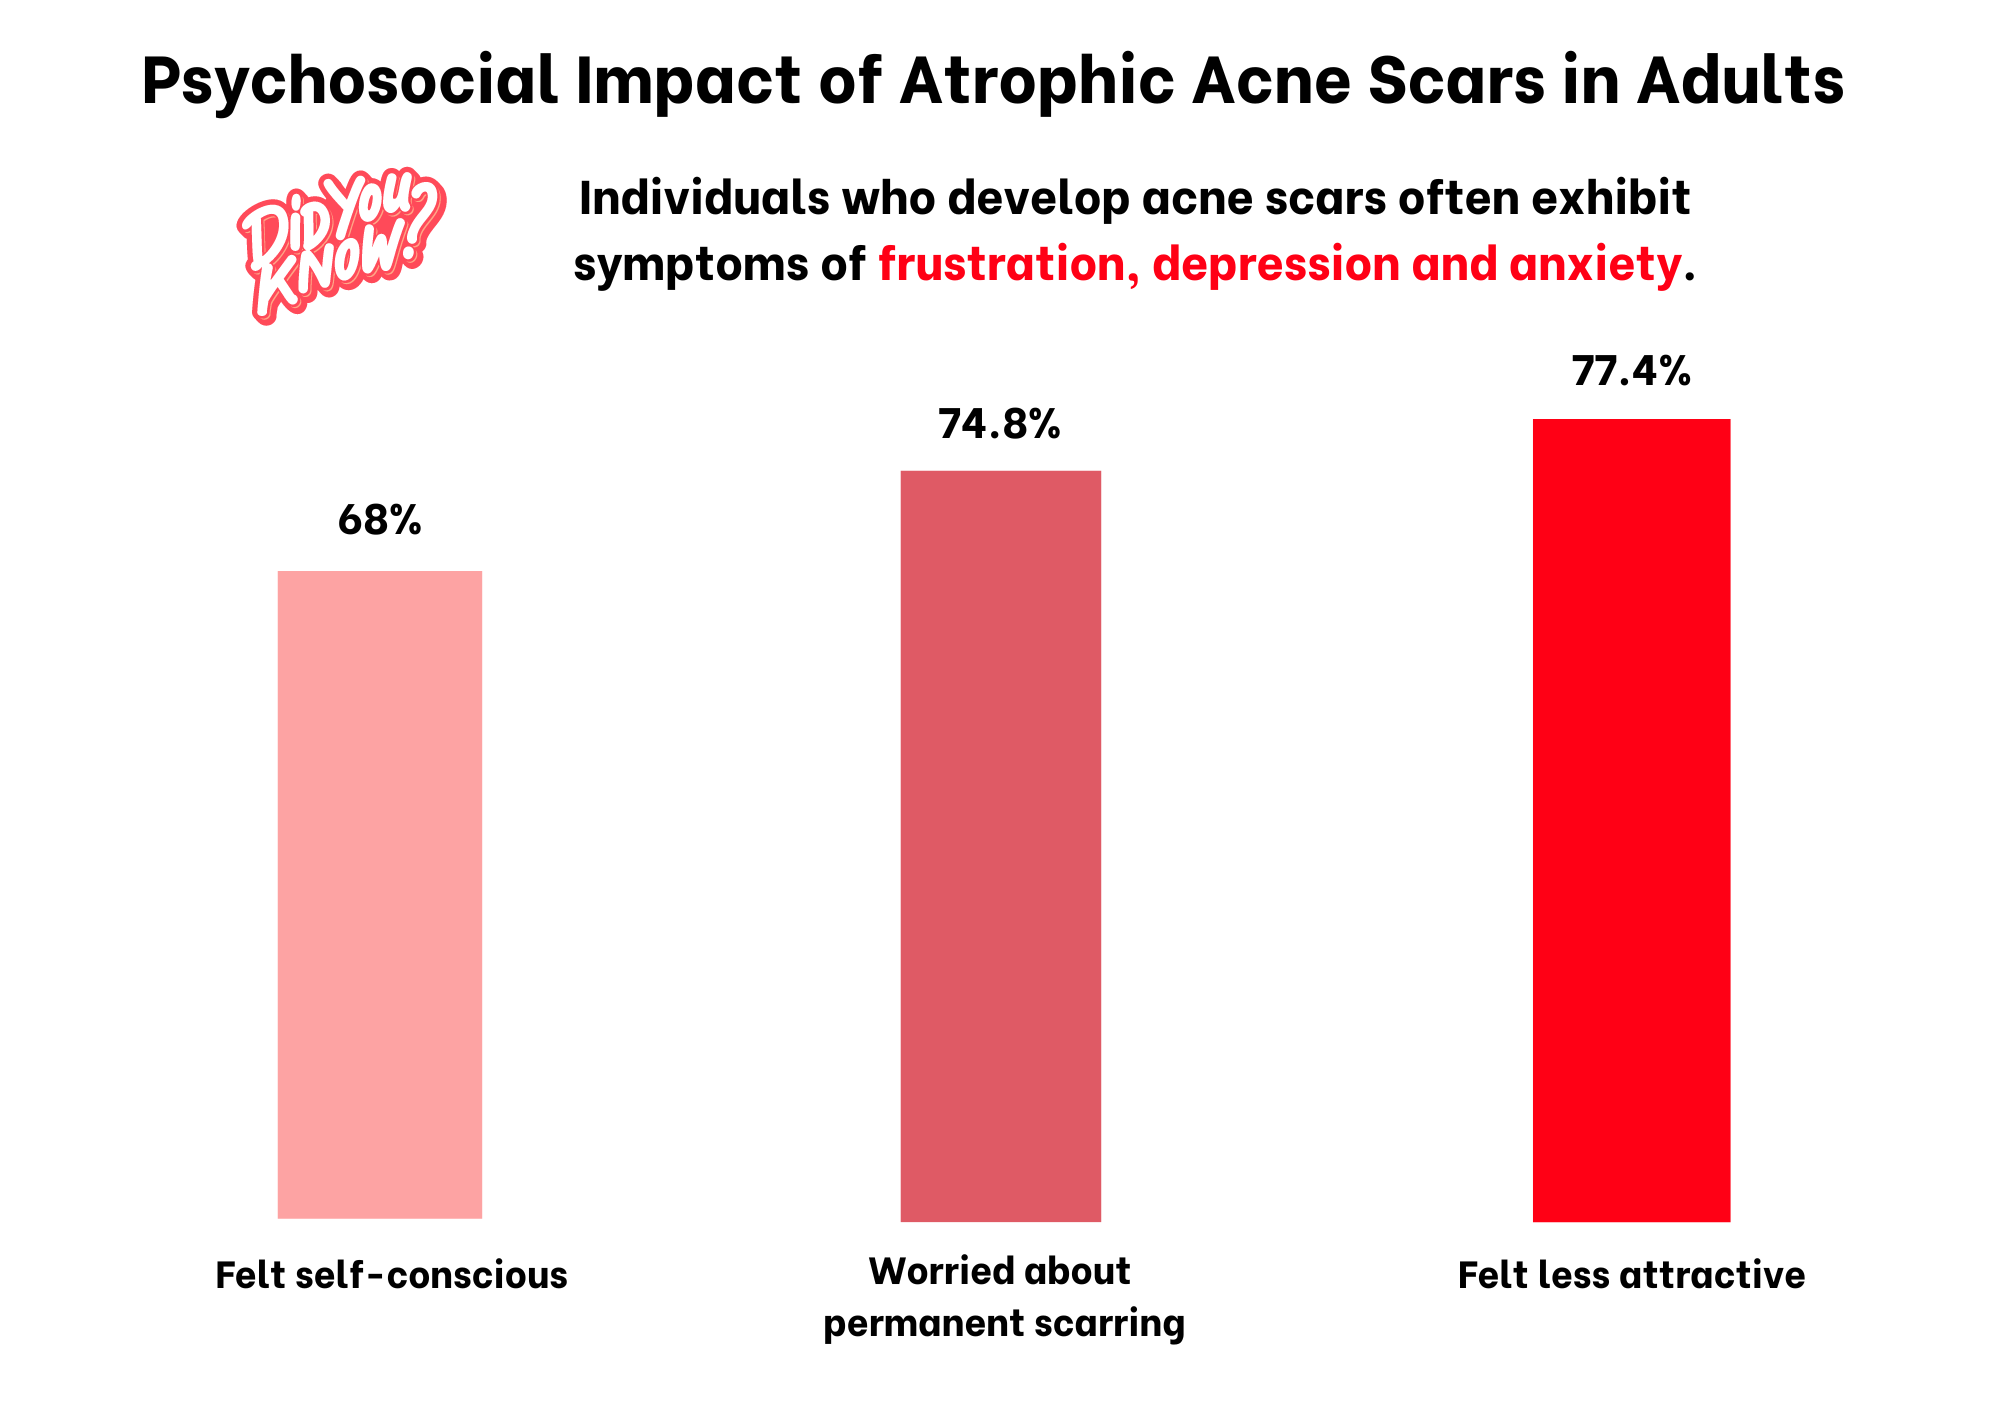 Acne scarring can cause individuals to feel self-conscious and less attractive.